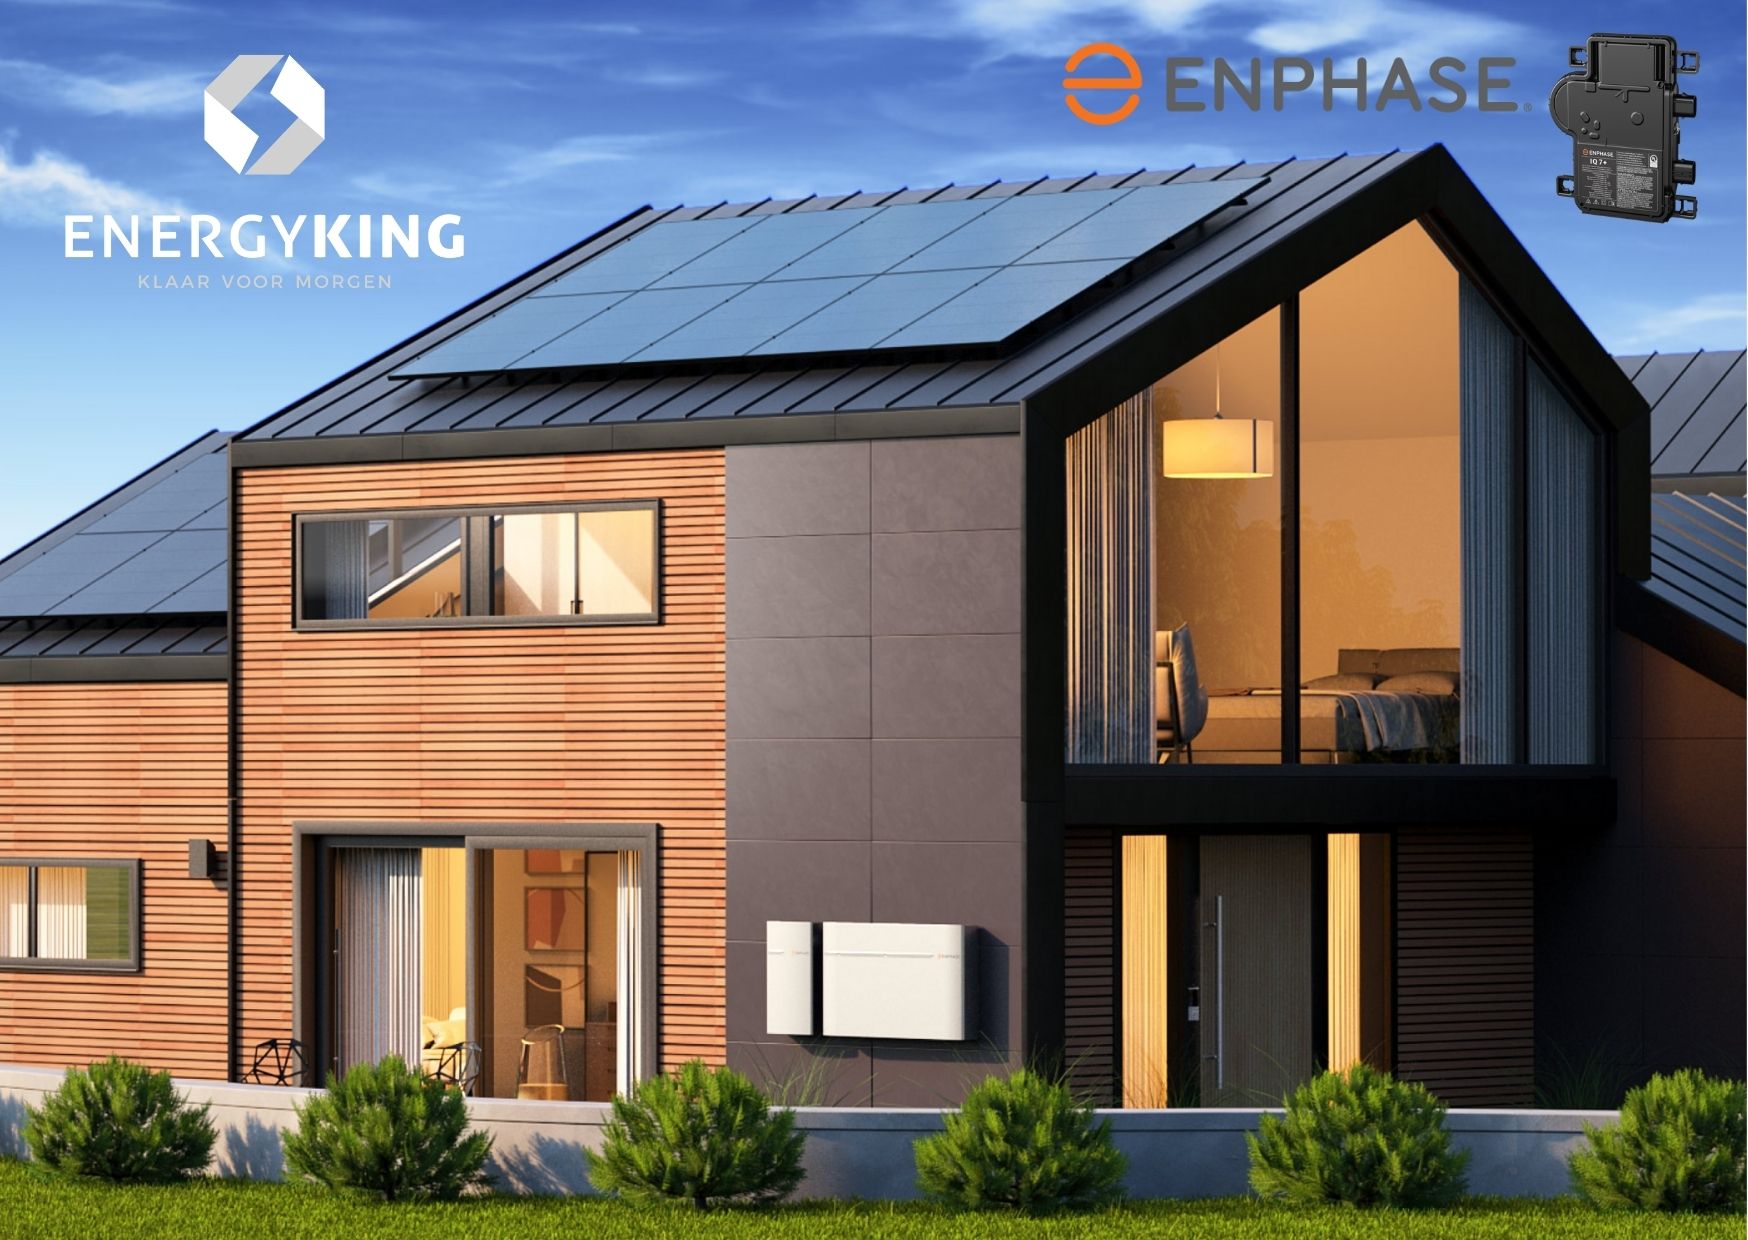 House with Enphase solar panels and Enphase batteries